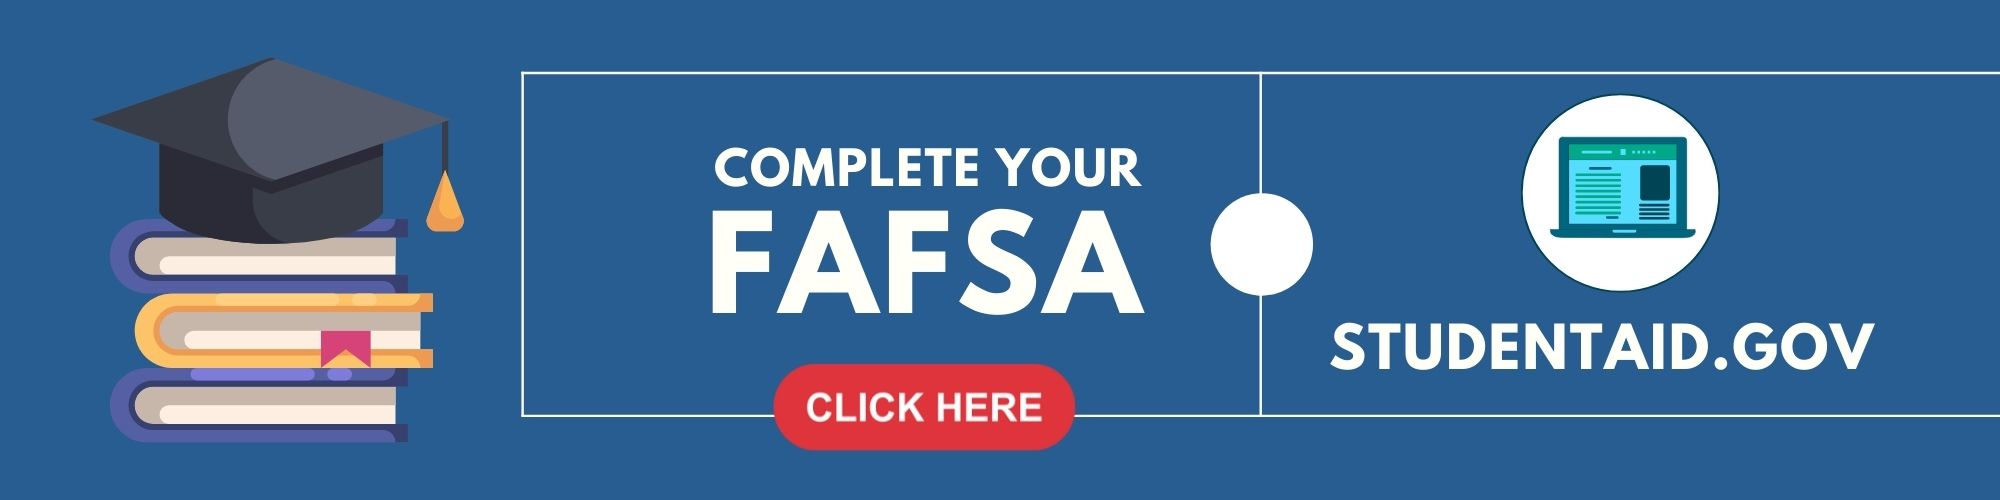 Complete your FAFSA